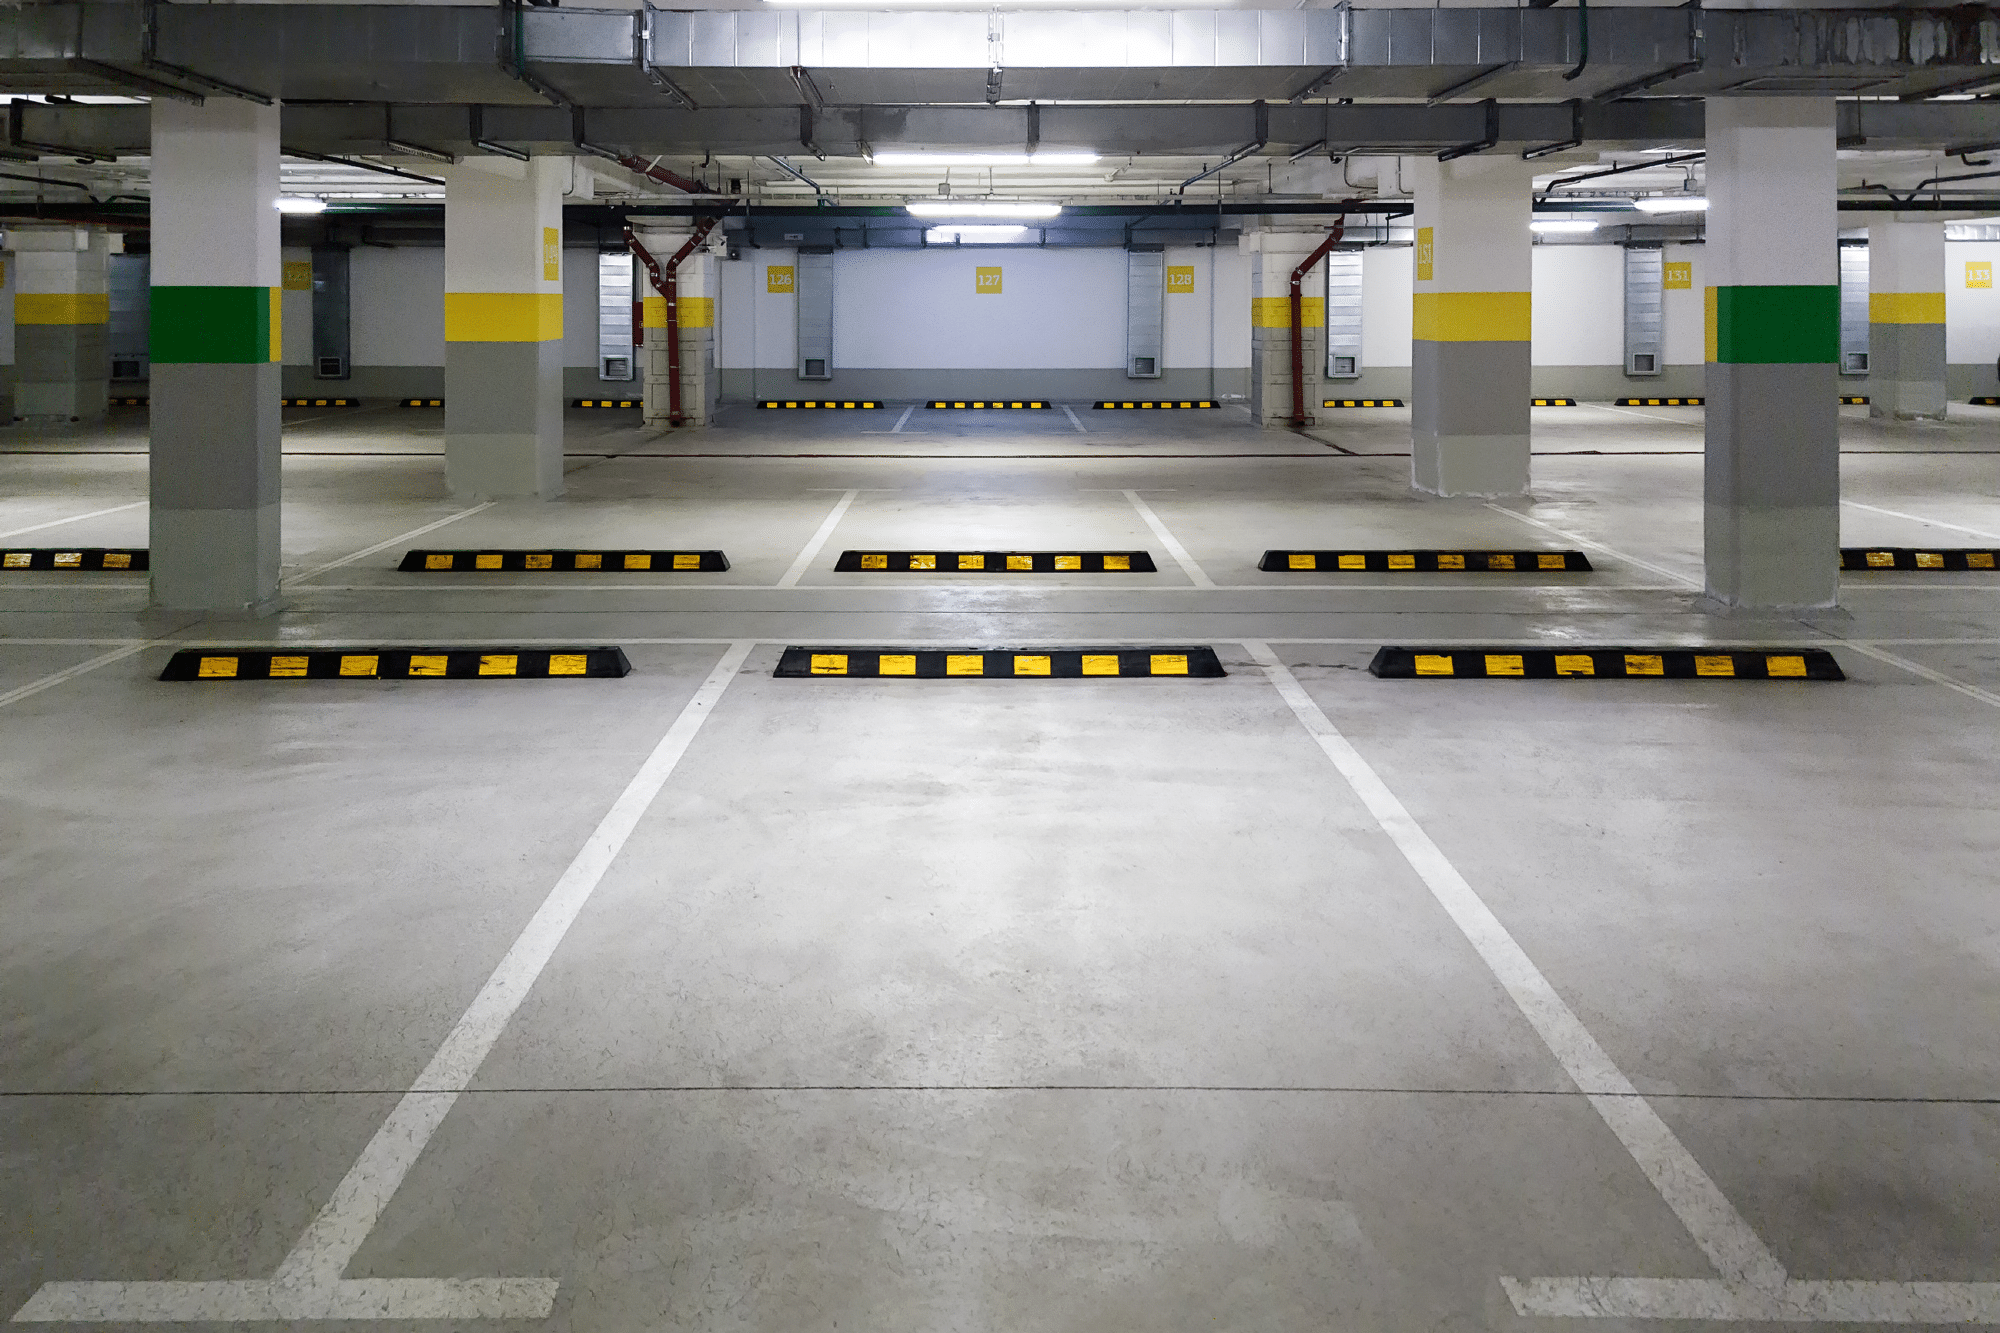 Editor's Note: A parking lot with yellow and green stripes.